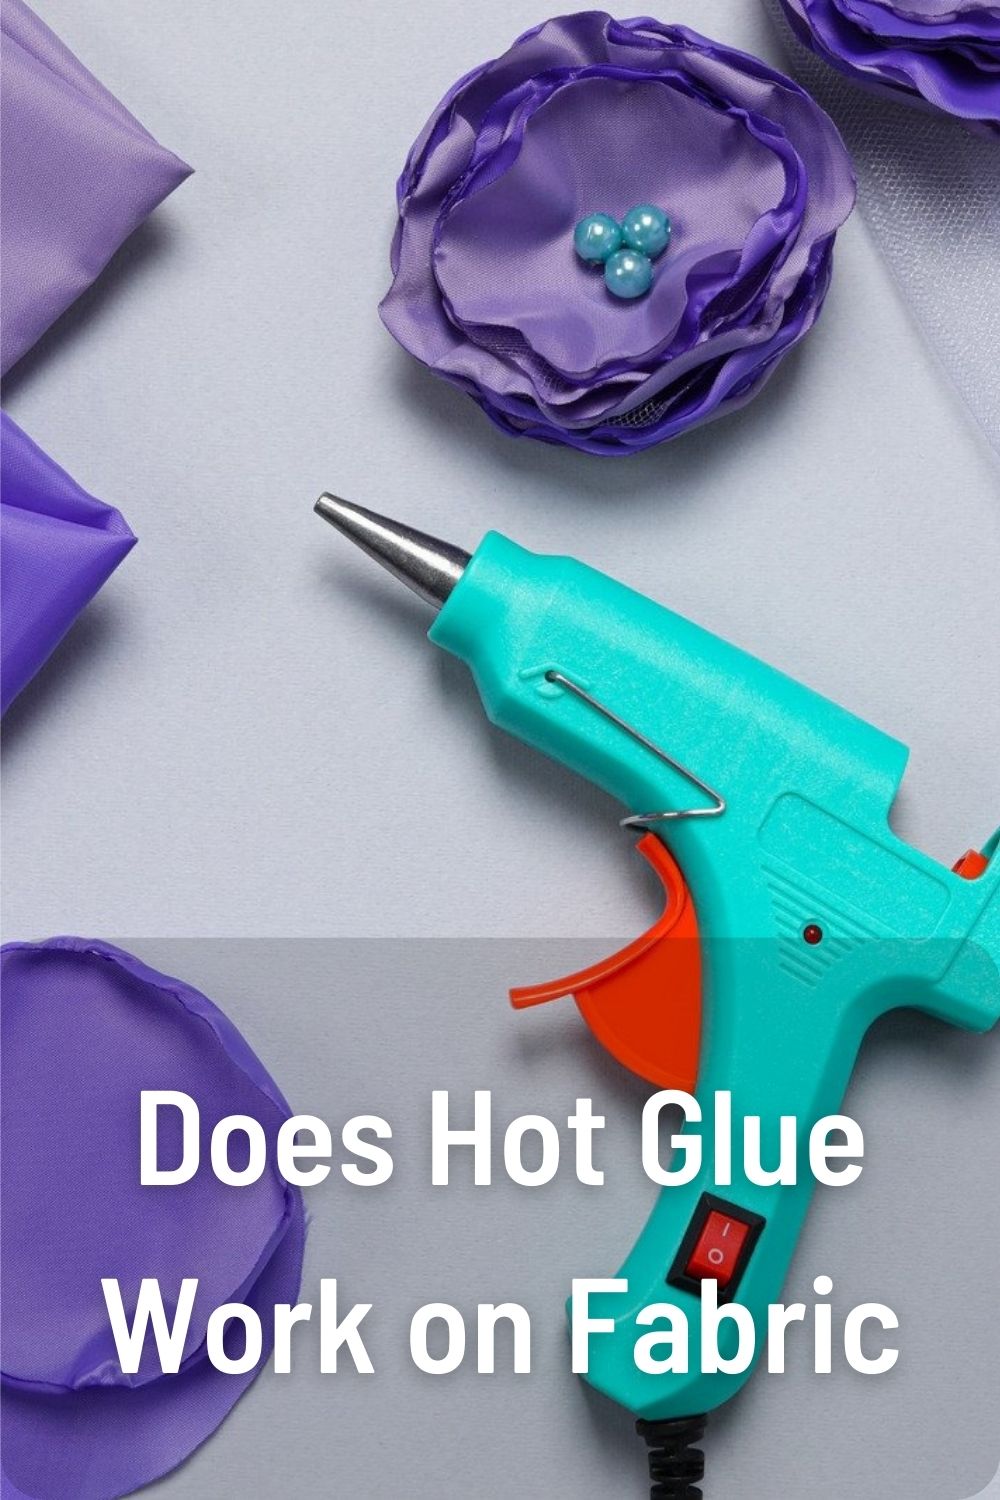 Does Hot Glue Work on Fabric